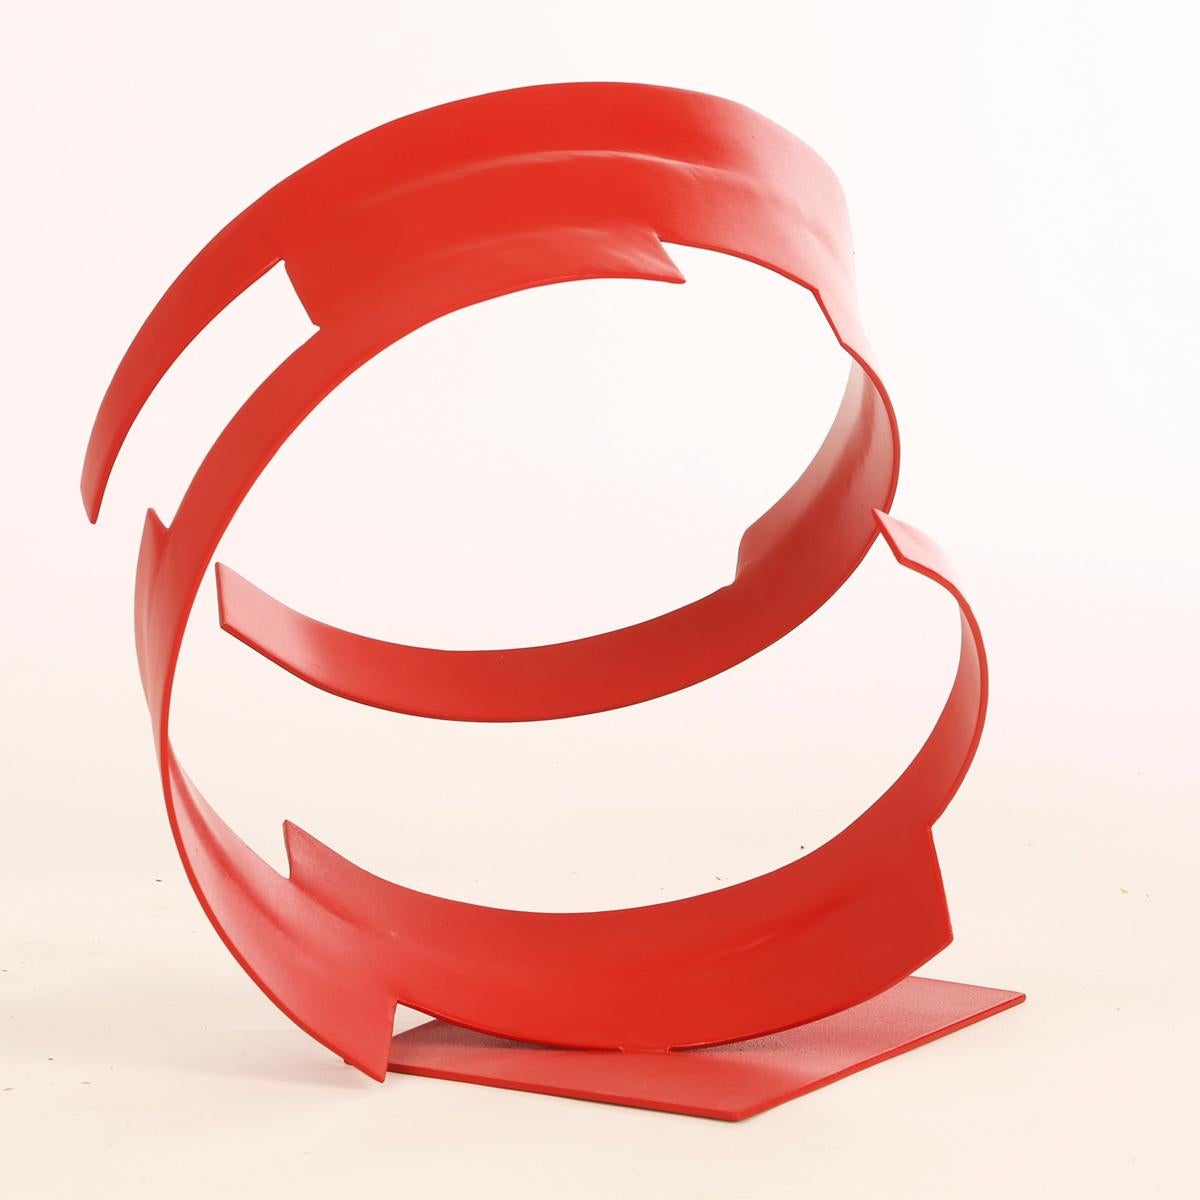 East Coast - Metal, Abstract Sculpture, Contemporary Art, Red, Gareth Griffiths For Sale 2